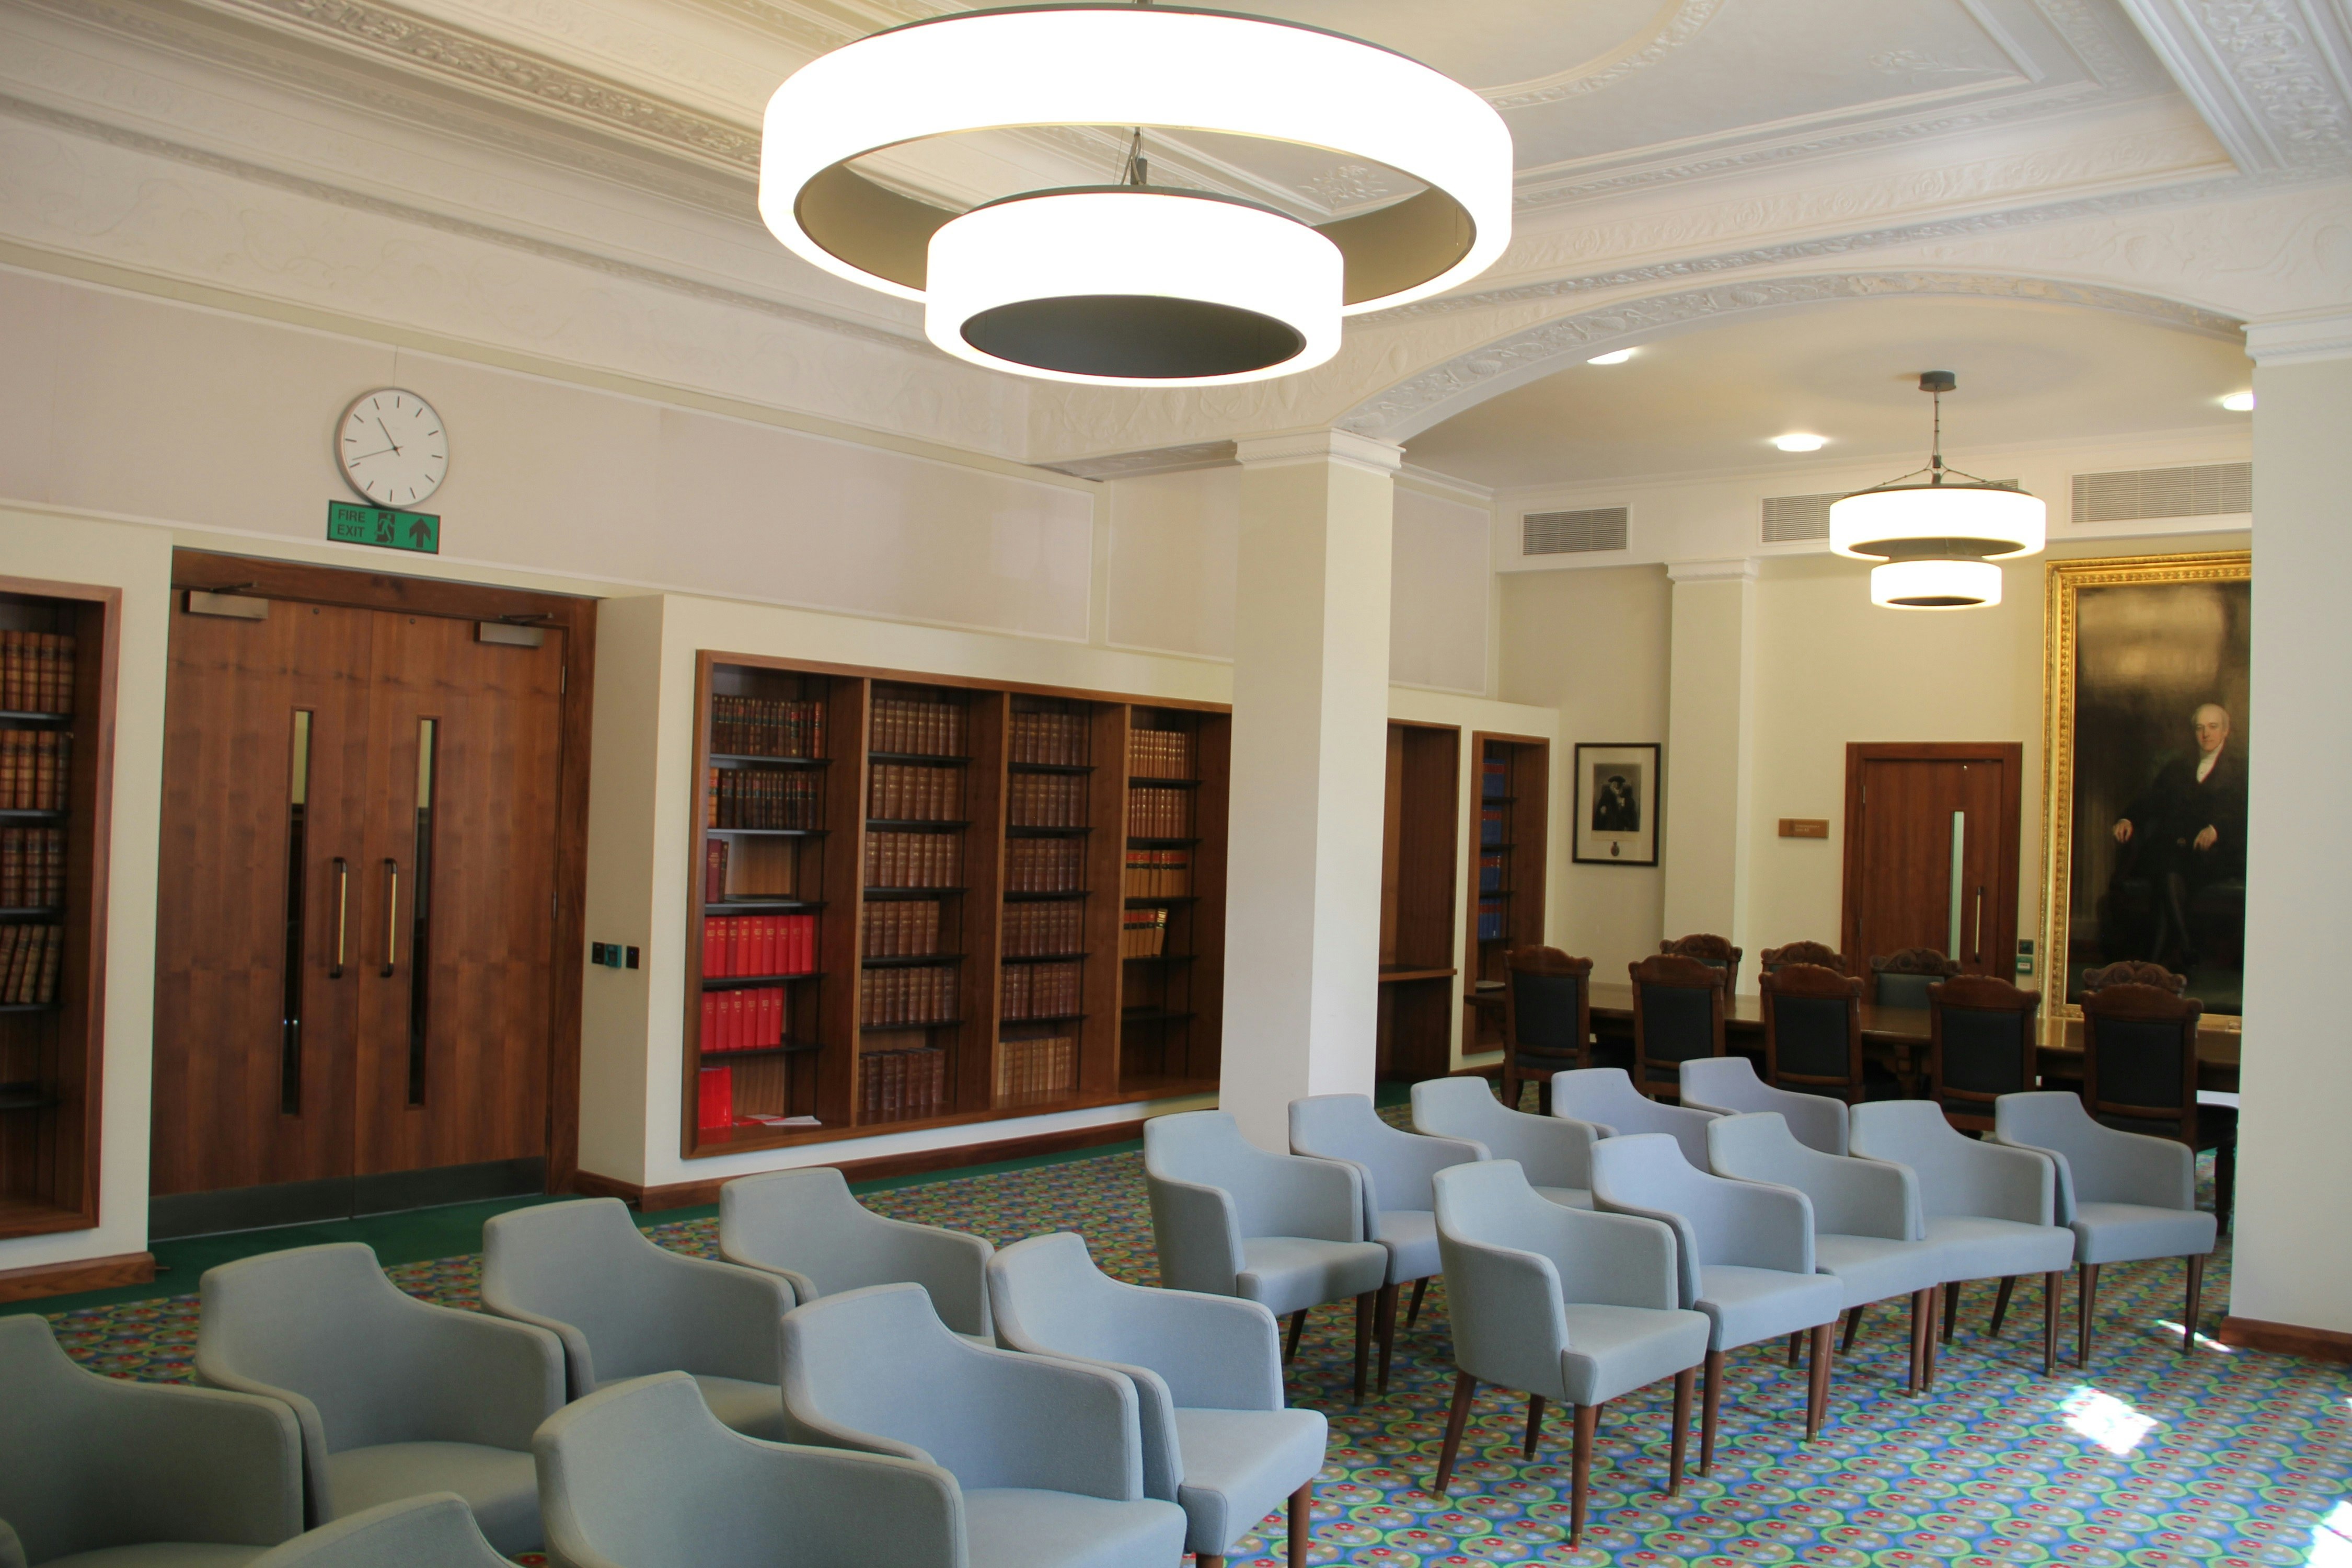 Away Day Venues in South London - The Supreme Court of the United Kingdom